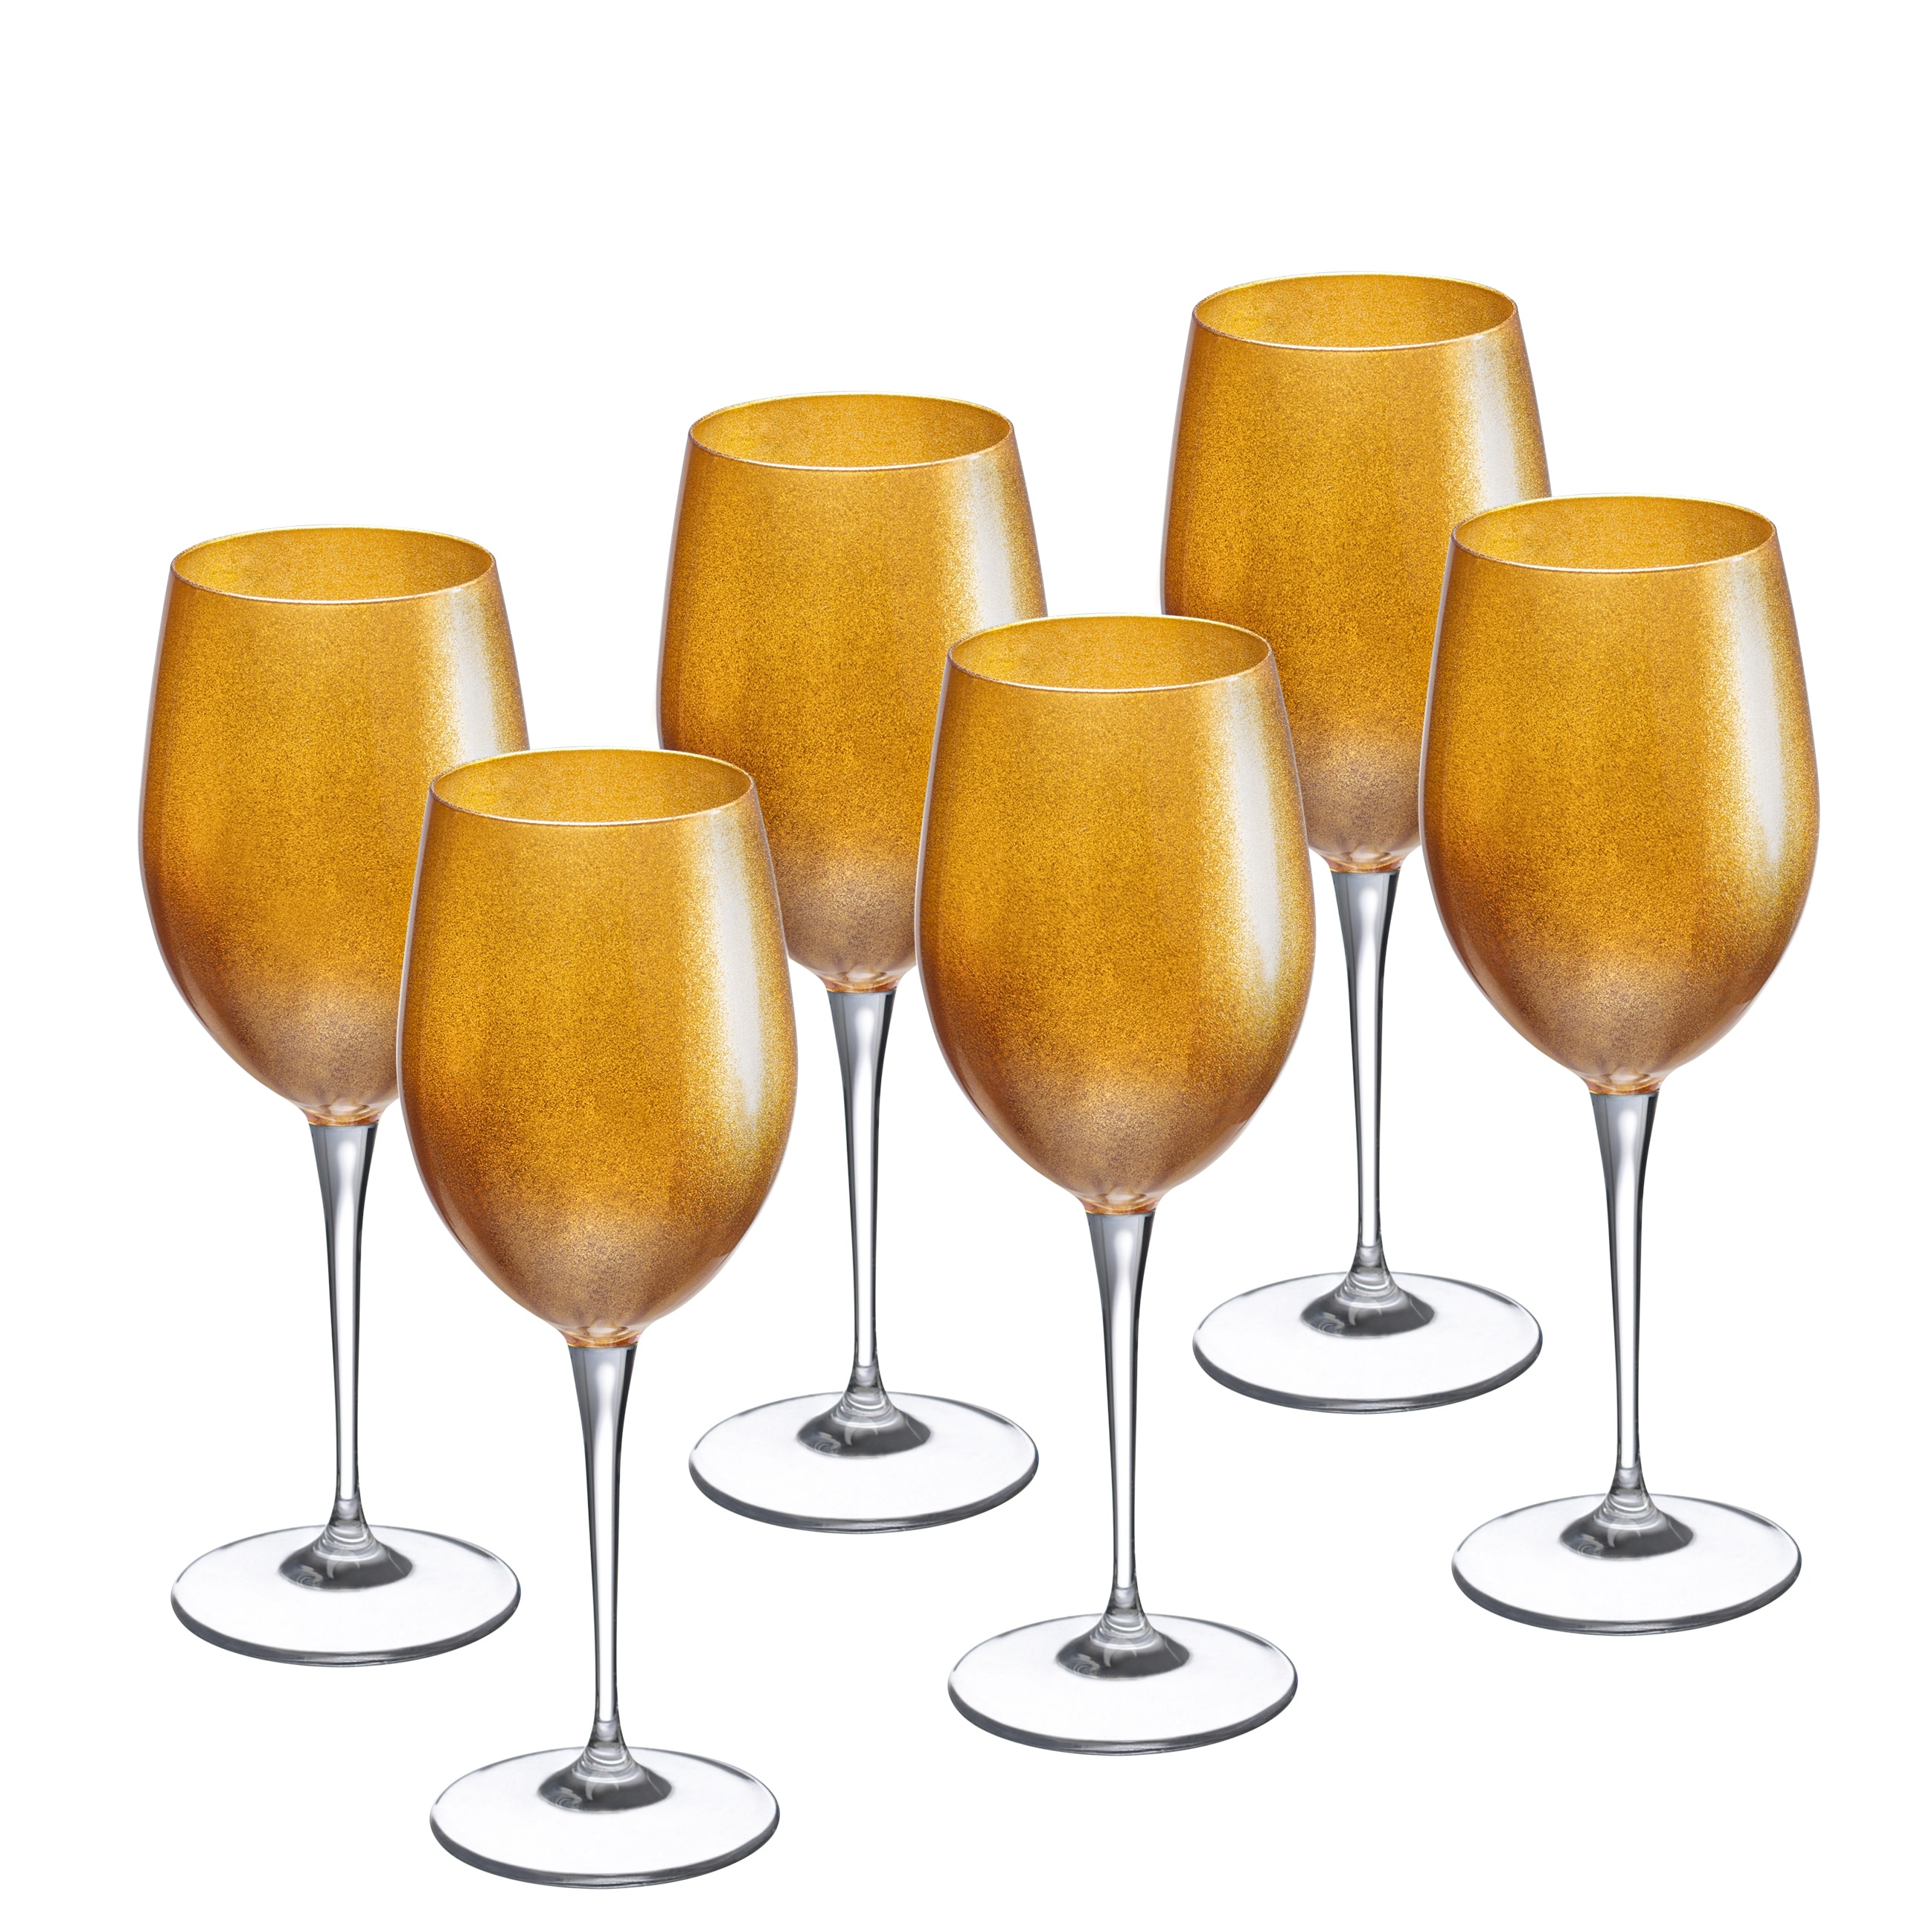 https://ak1.ostkcdn.com/images/products/is/images/direct/f87fe154520f13acc84d3546d1a418017f08b61a/Majestic-Gifts-Inc.-Glass-Wine-Water-Goblet-Set-6---Gold-Glass-W--Clear-Stem---18-oz.-Made-in-Europe.jpg